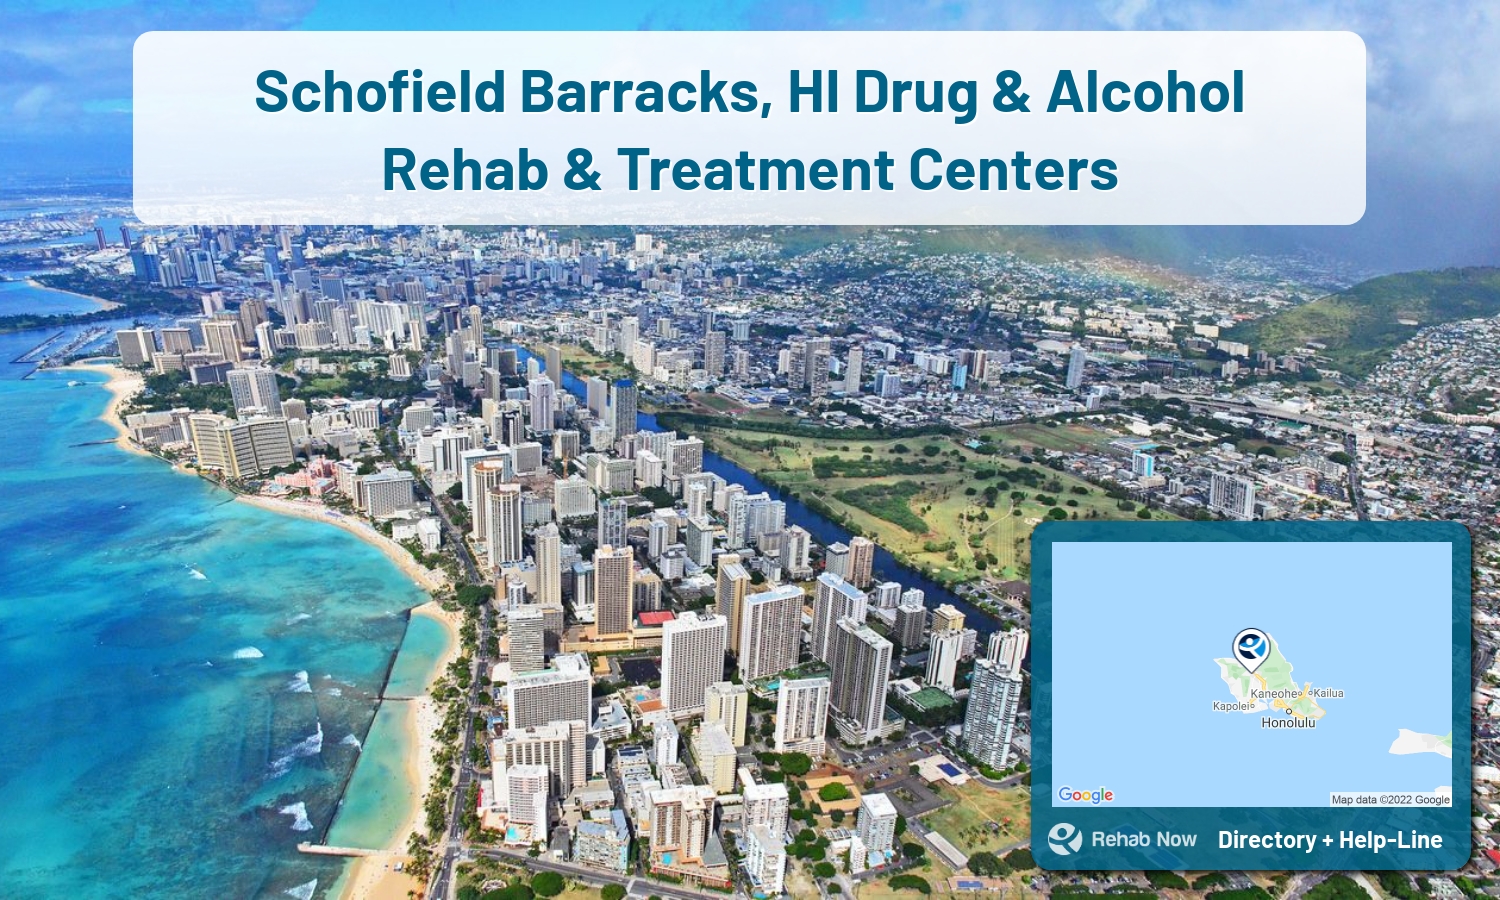 View options, availability, treatment methods, and more, for drug rehab and alcohol treatment in Schofield Barracks, Hawaii